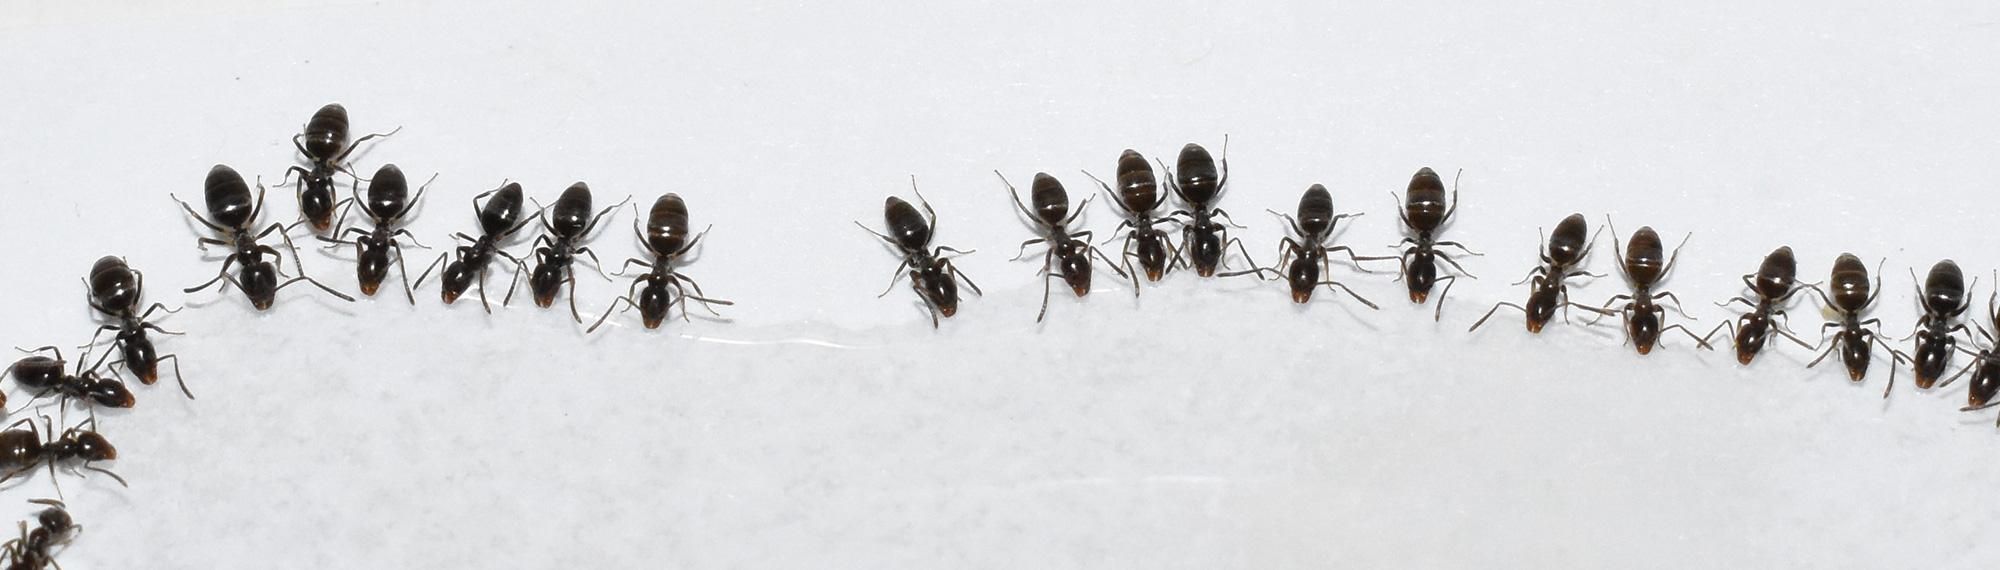 a line of odorous house ants